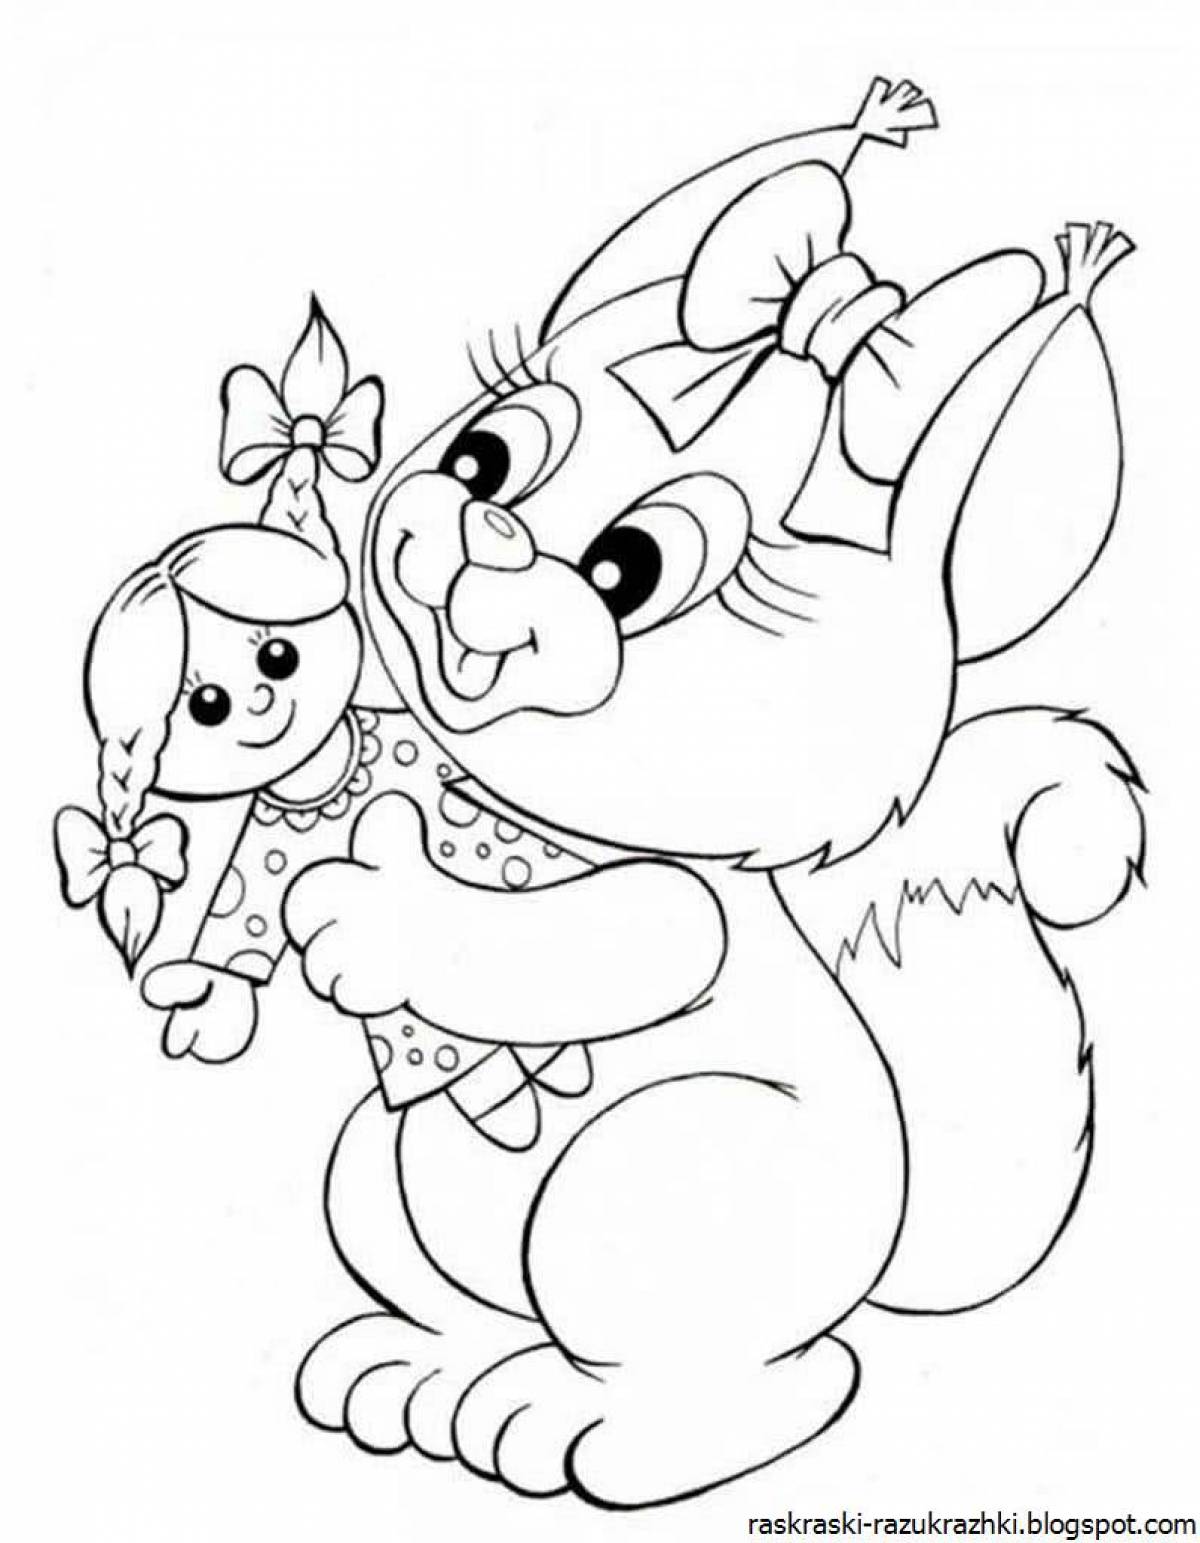 Zany squirrel coloring book for kids